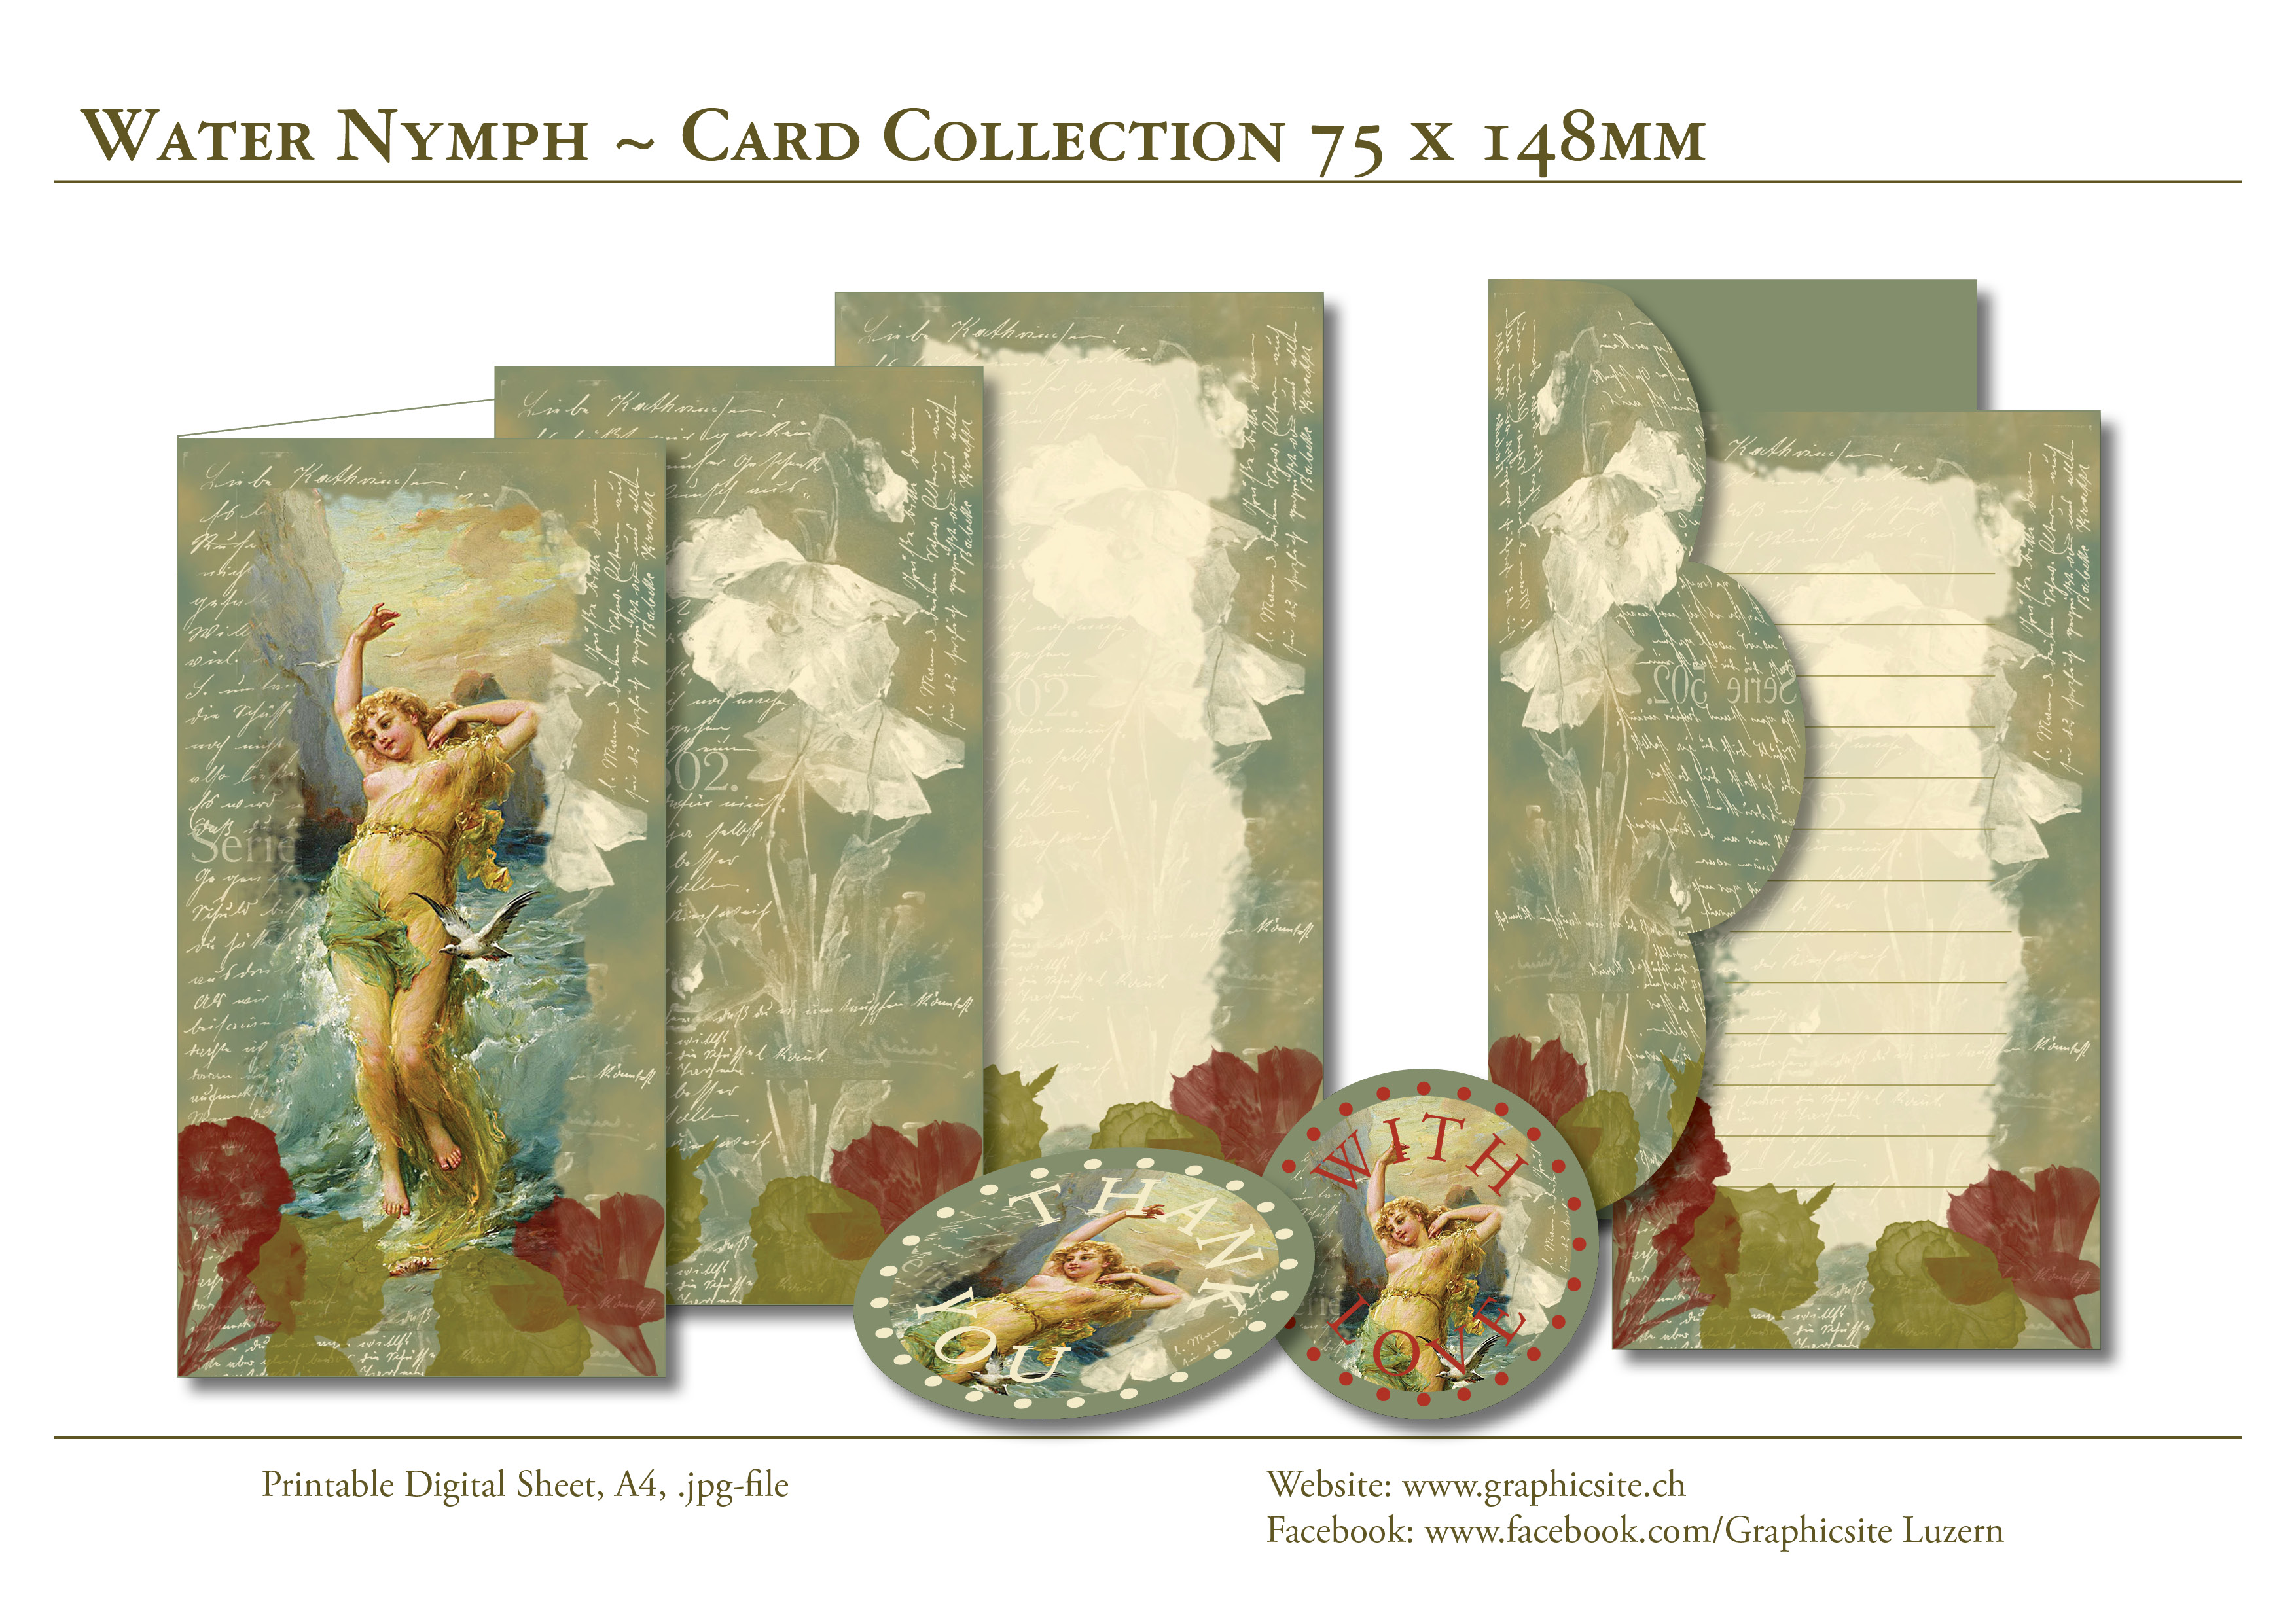 Printable Digital Sheets - CardCollection 75x148mm - WaterNymph - Vintage - Painting, Greeting Cards, Notecards, Envelop, GraphicDesign, Luzern